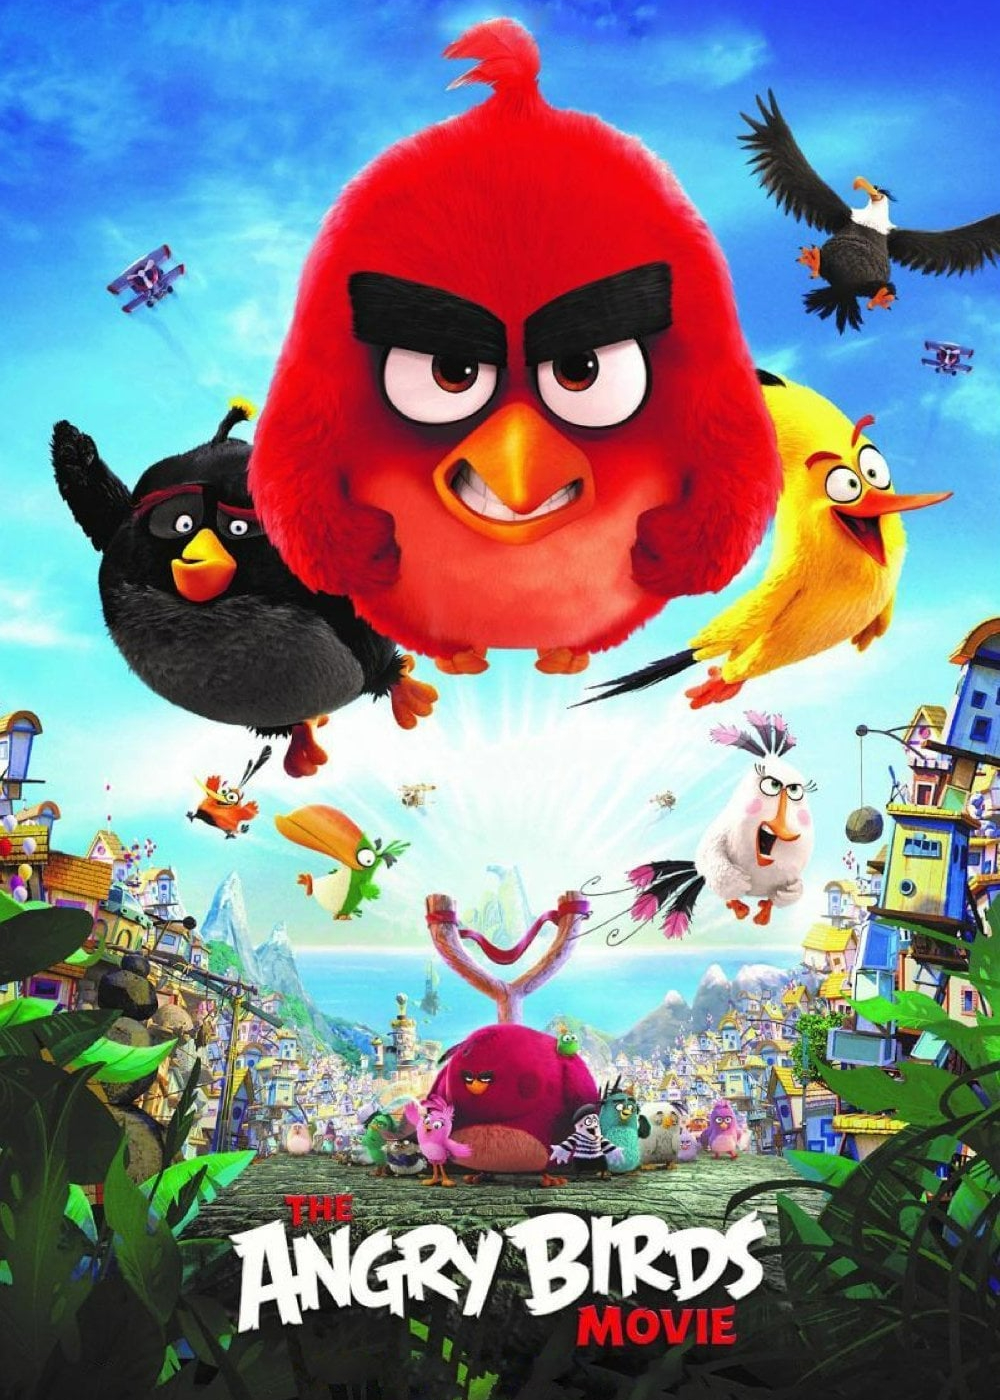 Poster Phim Phim Angry Birds (The Angry Birds Movie)